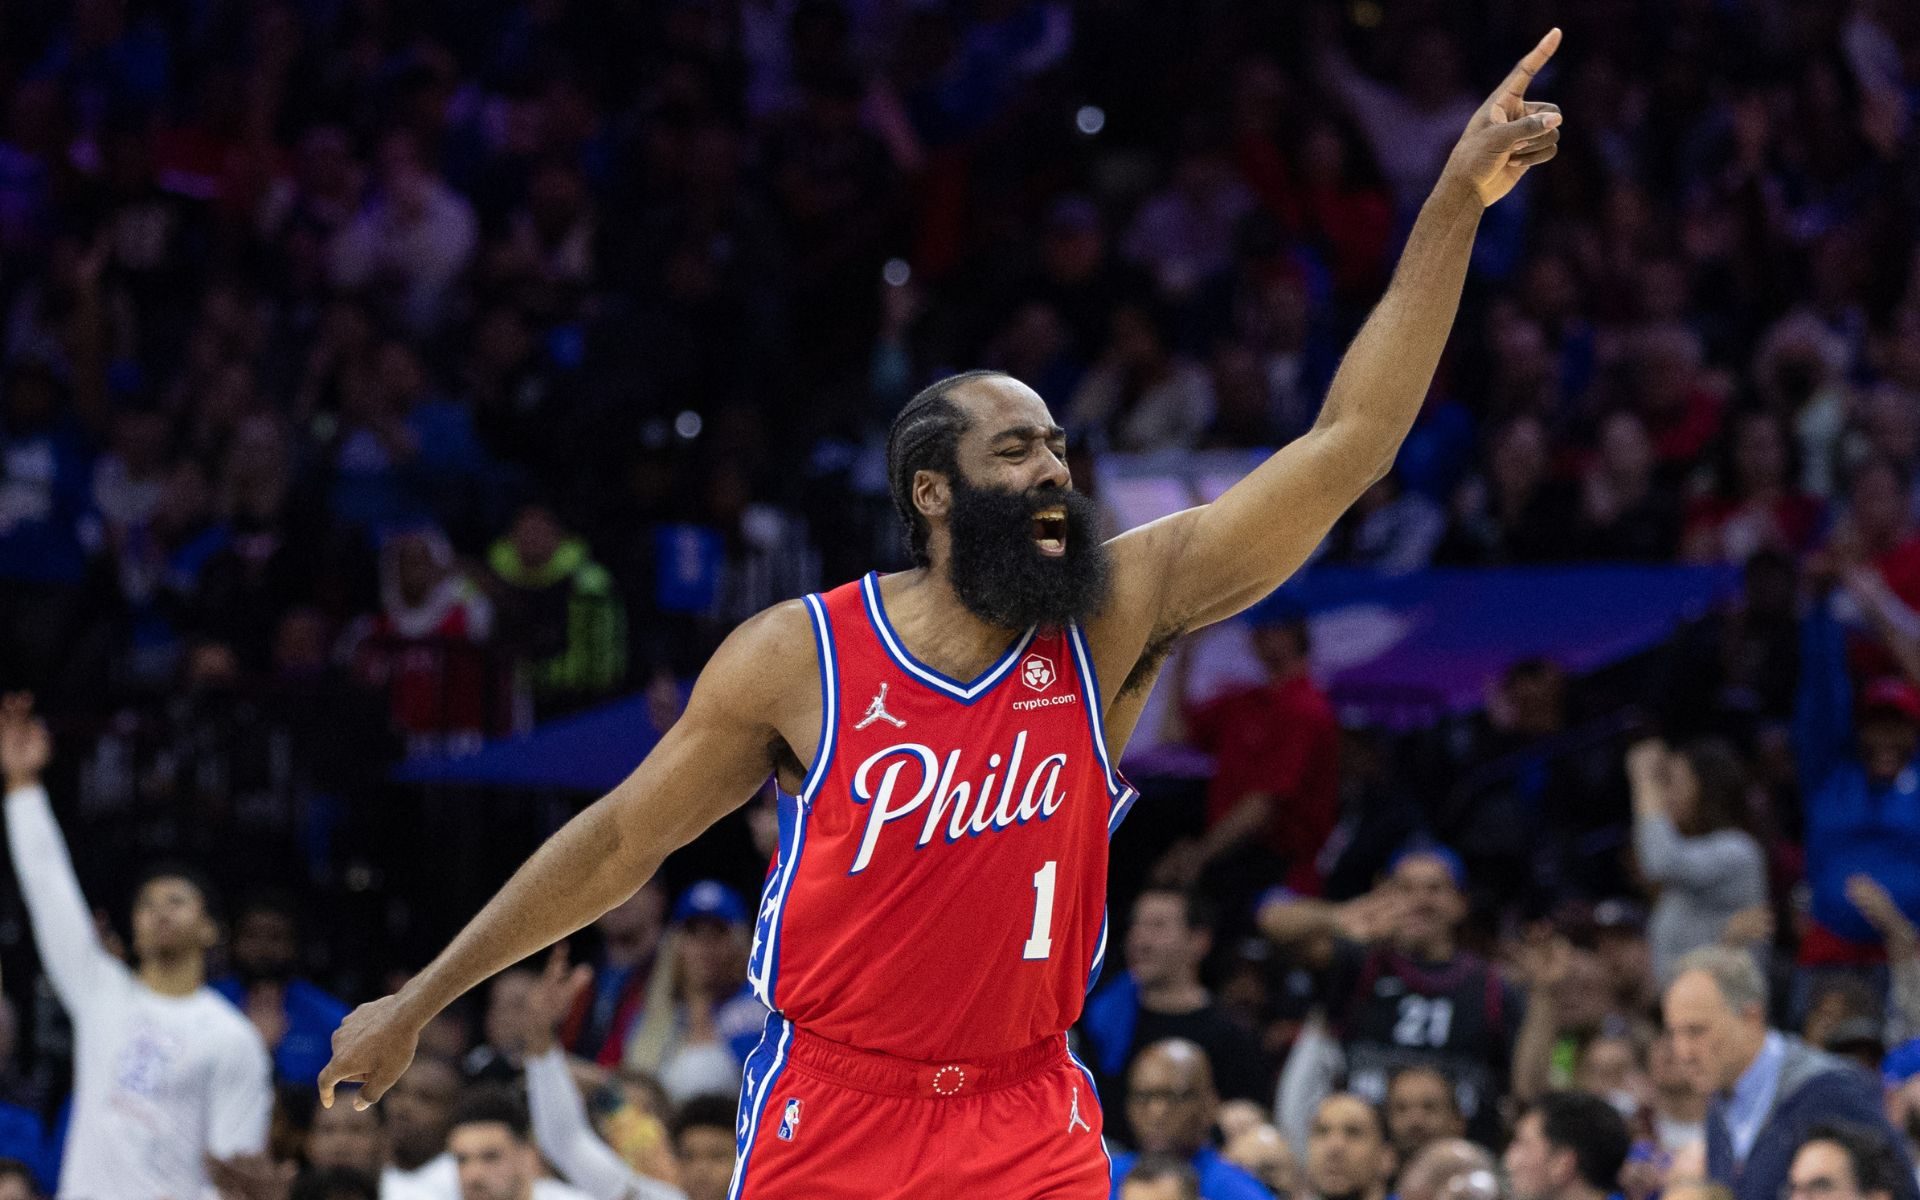 James Harden returns to 76ers on 2-year, $68.6-million deal – report